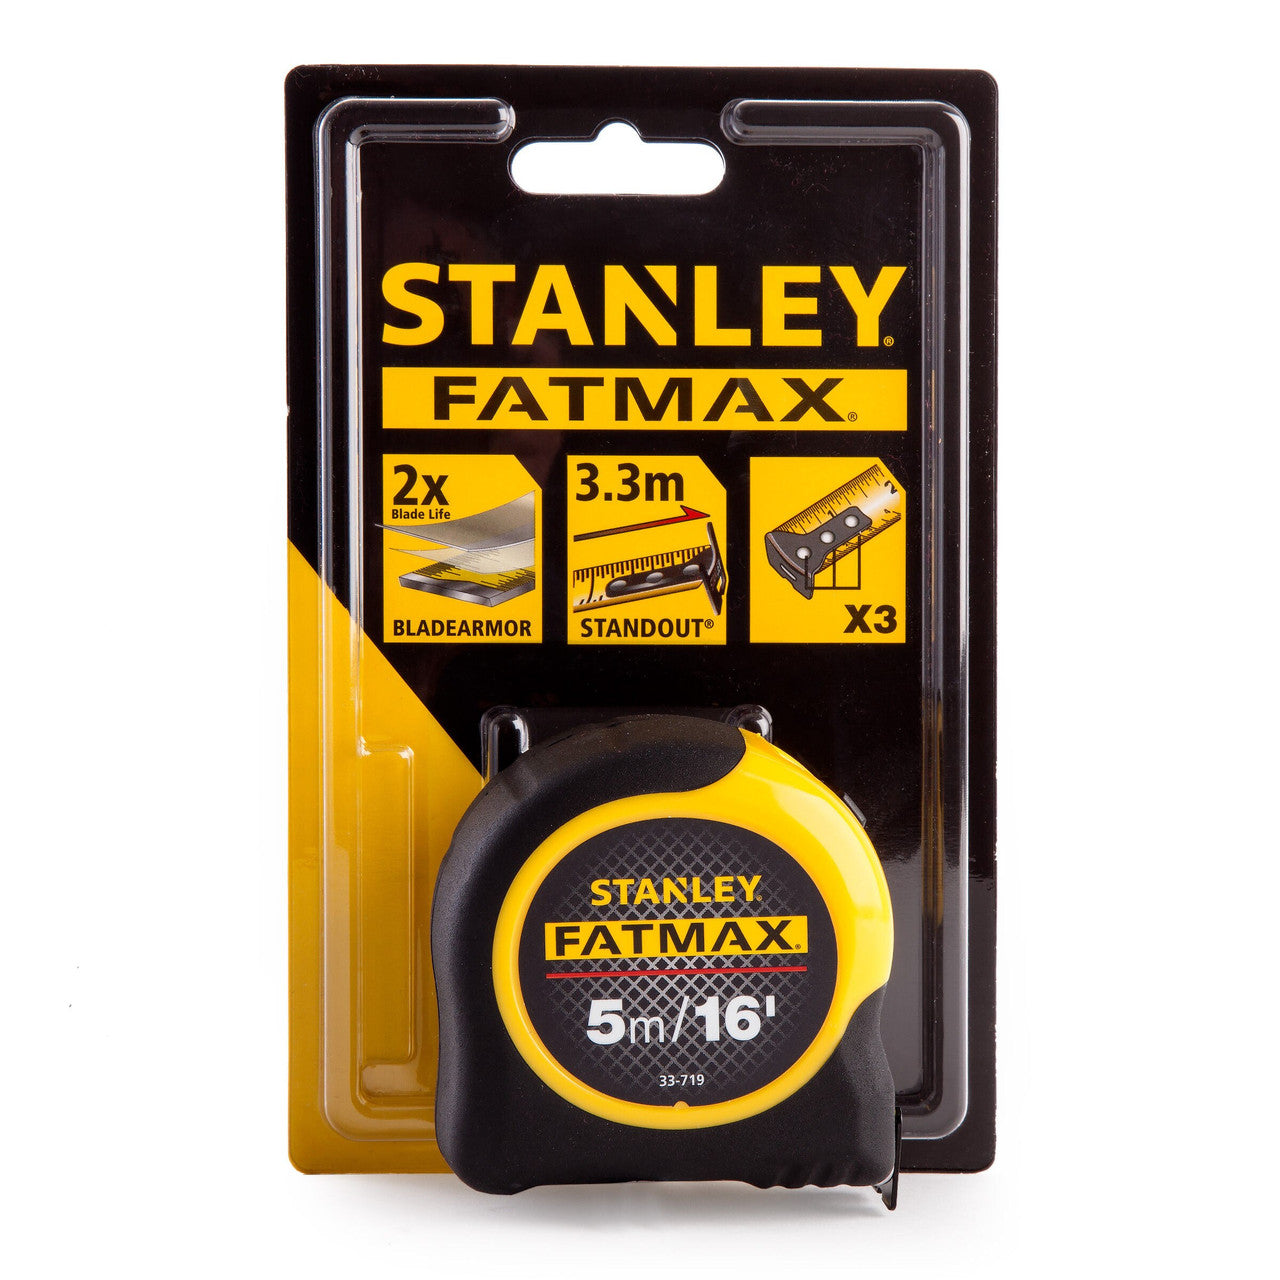 Stanley 0-33-719 FatMax Metric/Imperial Tape Measure with Blade Armor 5m